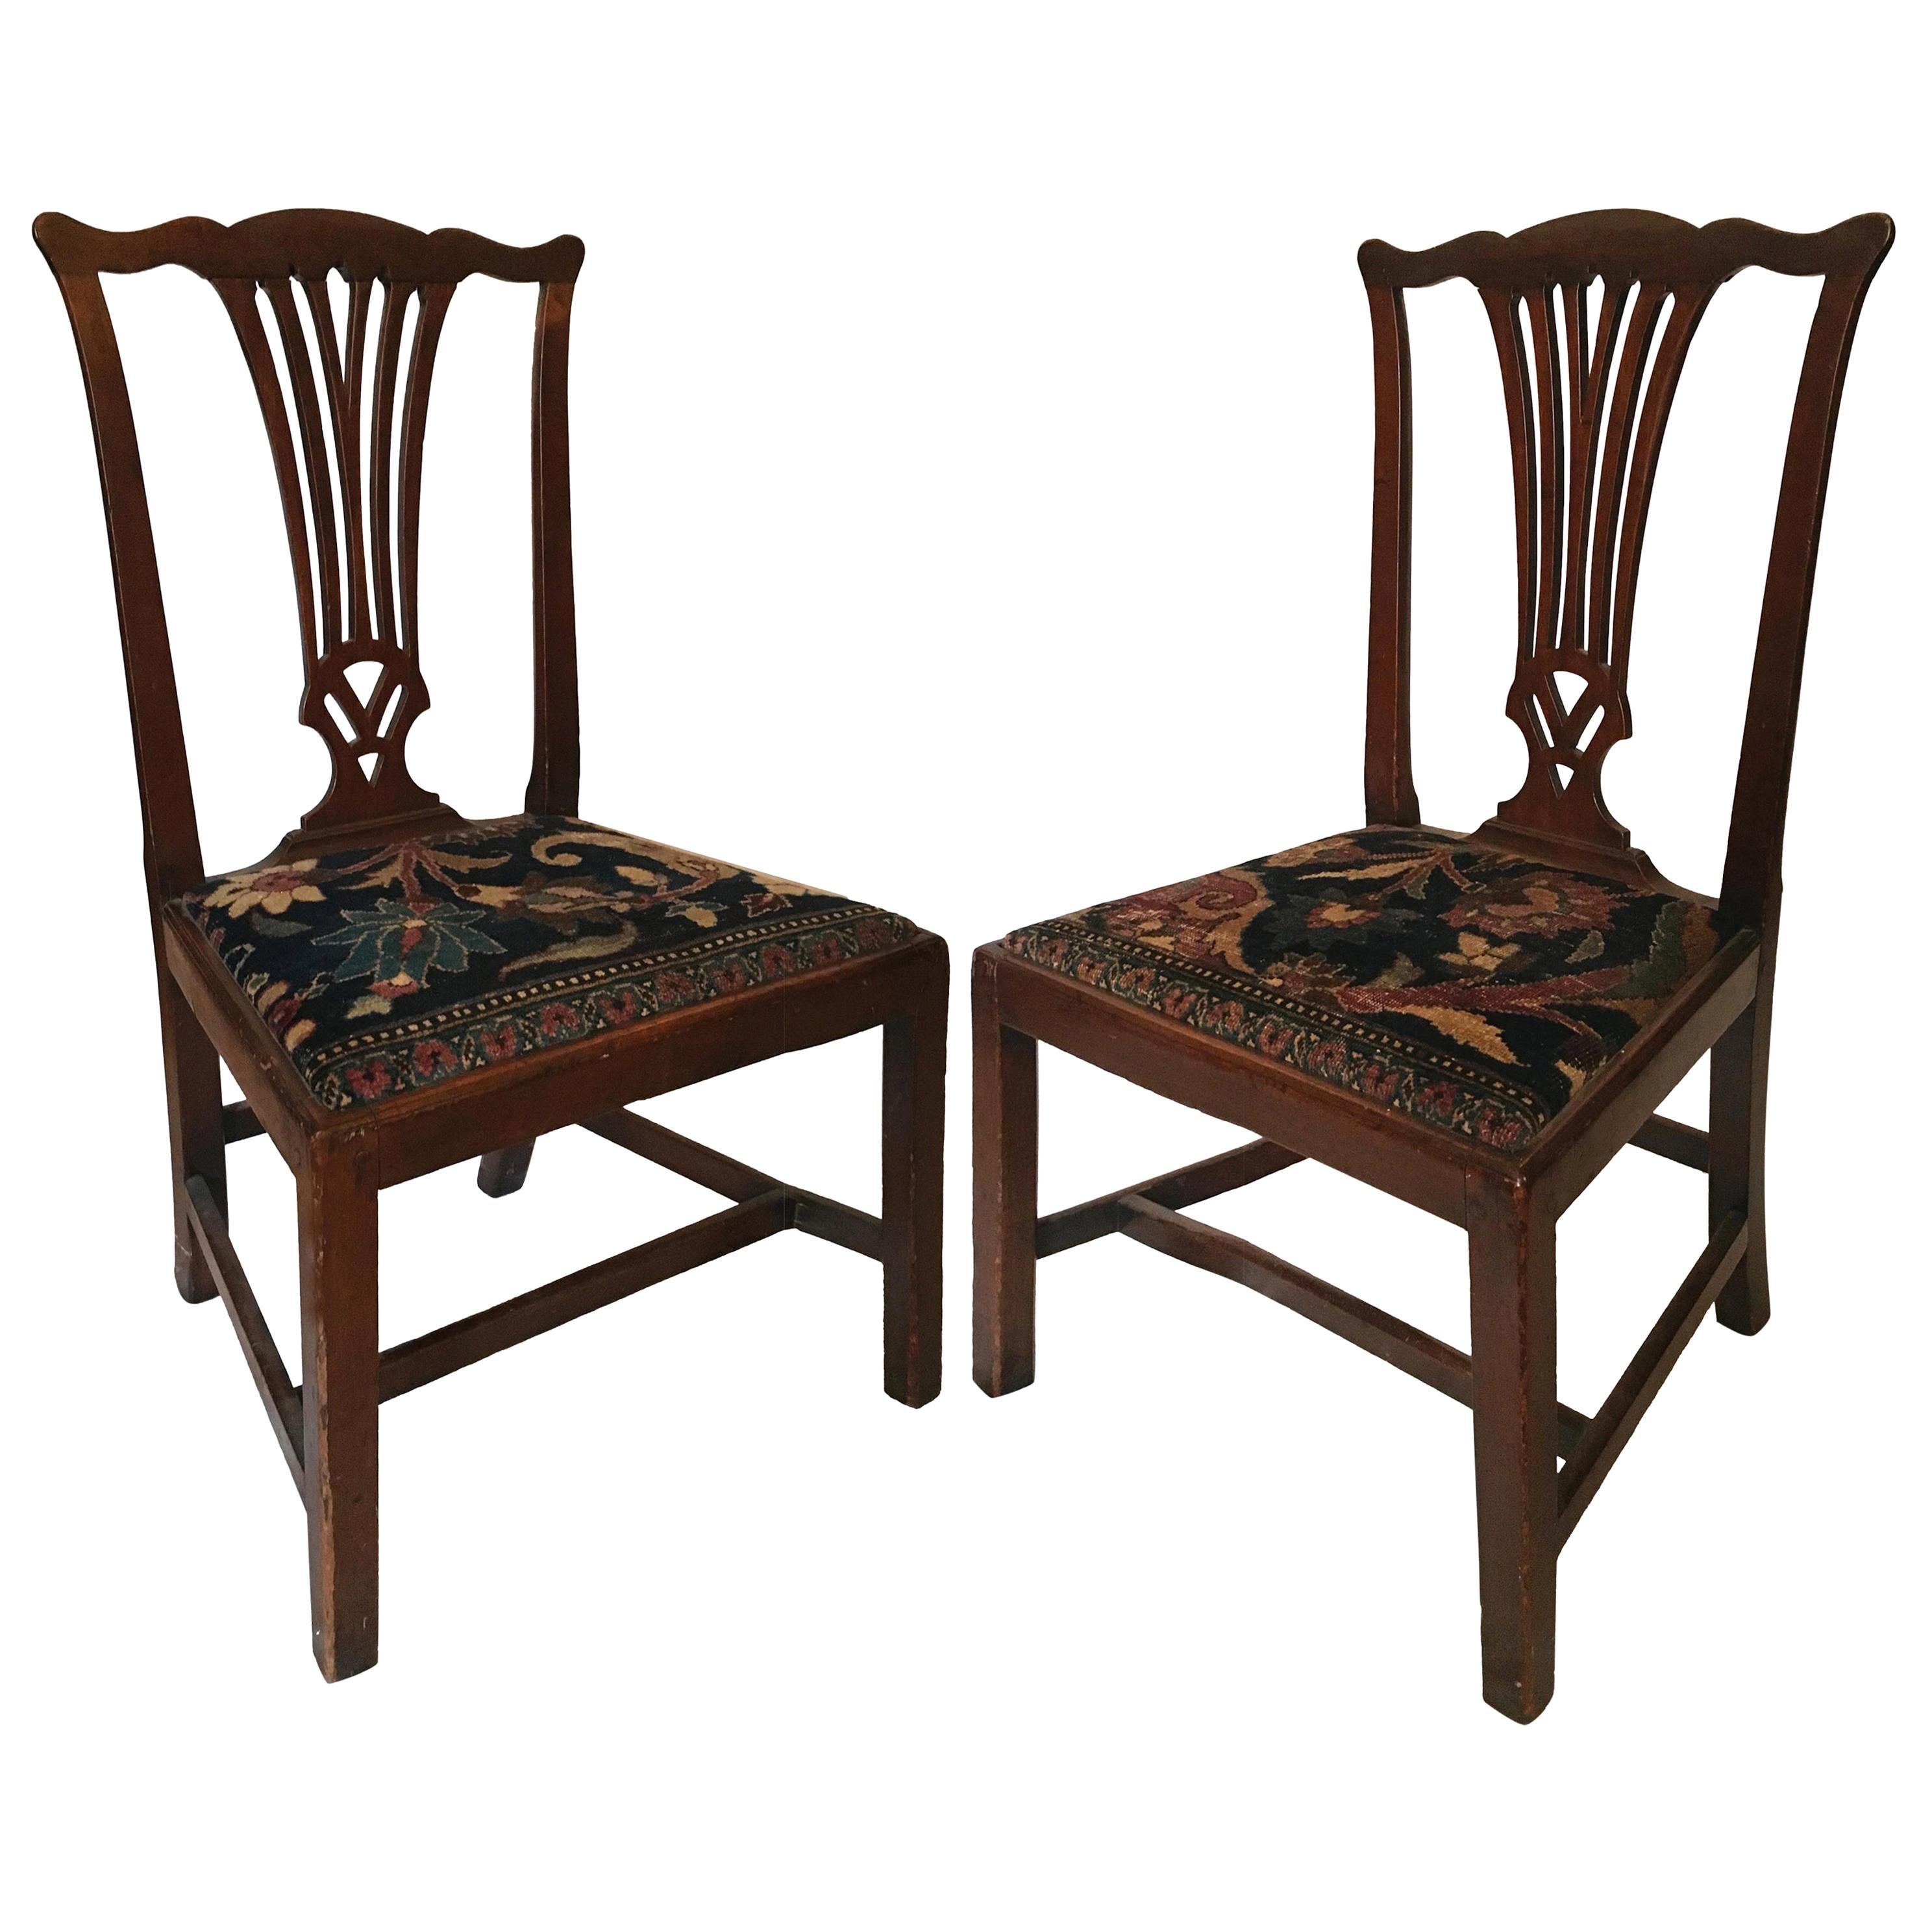 Mid-18th Century American Walnut Chippendale Chairs with Oushak Seats